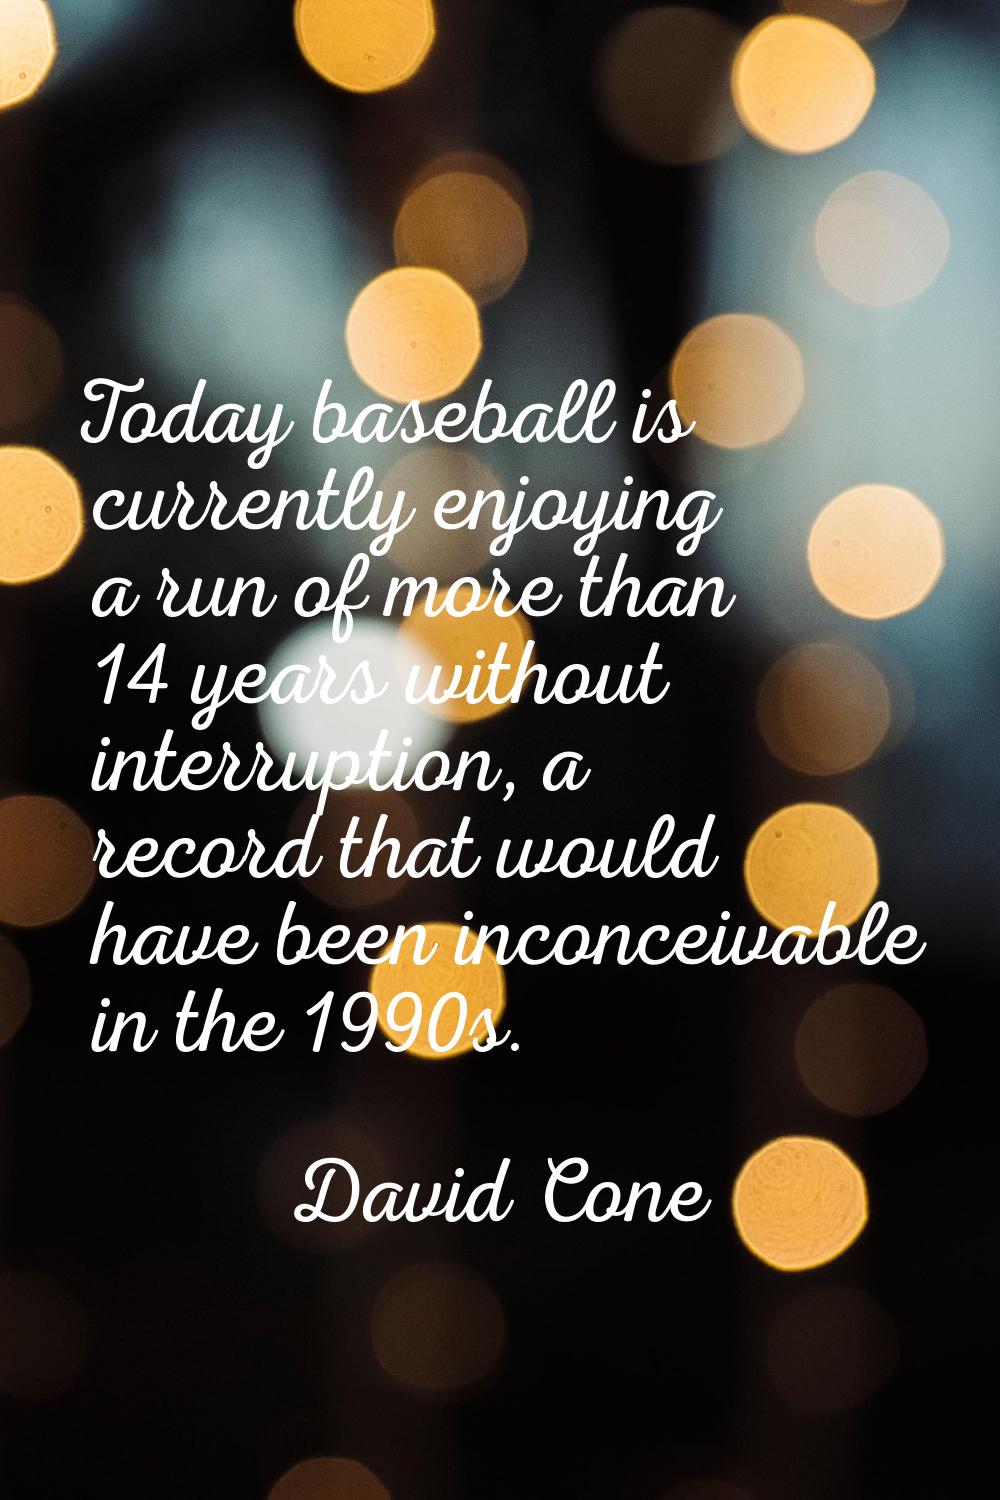 Today baseball is currently enjoying a run of more than 14 years without interruption, a record tha